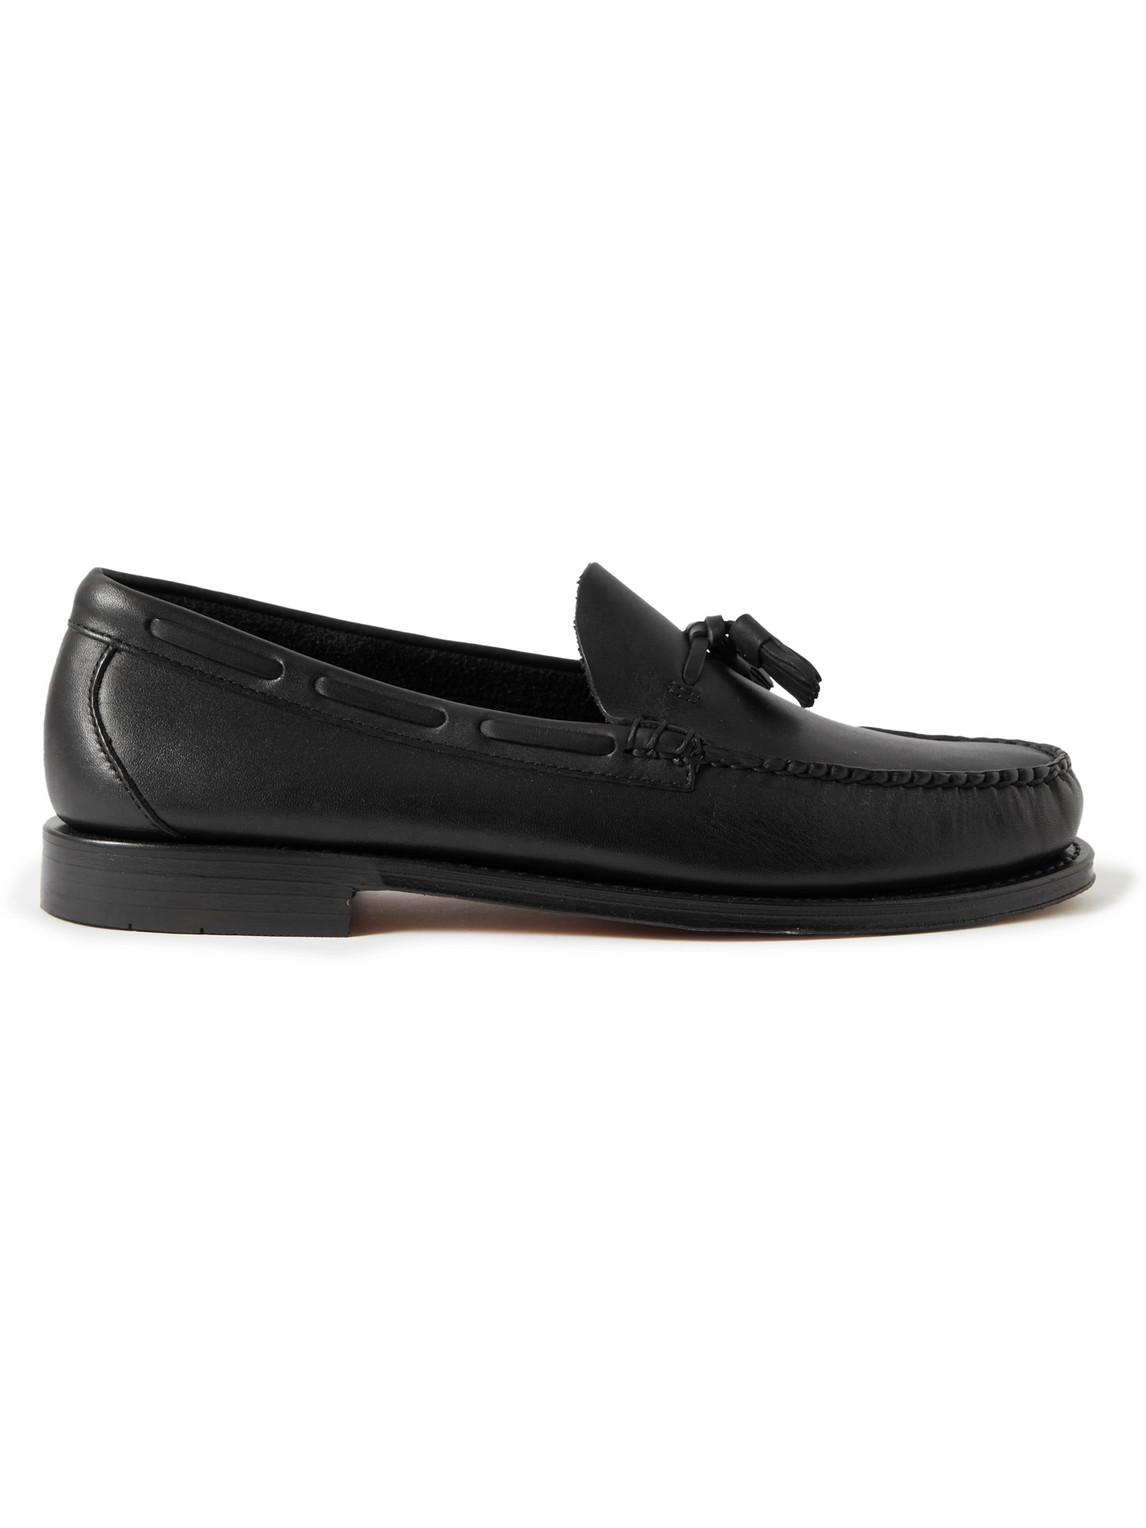 G.h. Bass & Co. Weejun Heritage Larson Leather Loafers In Black